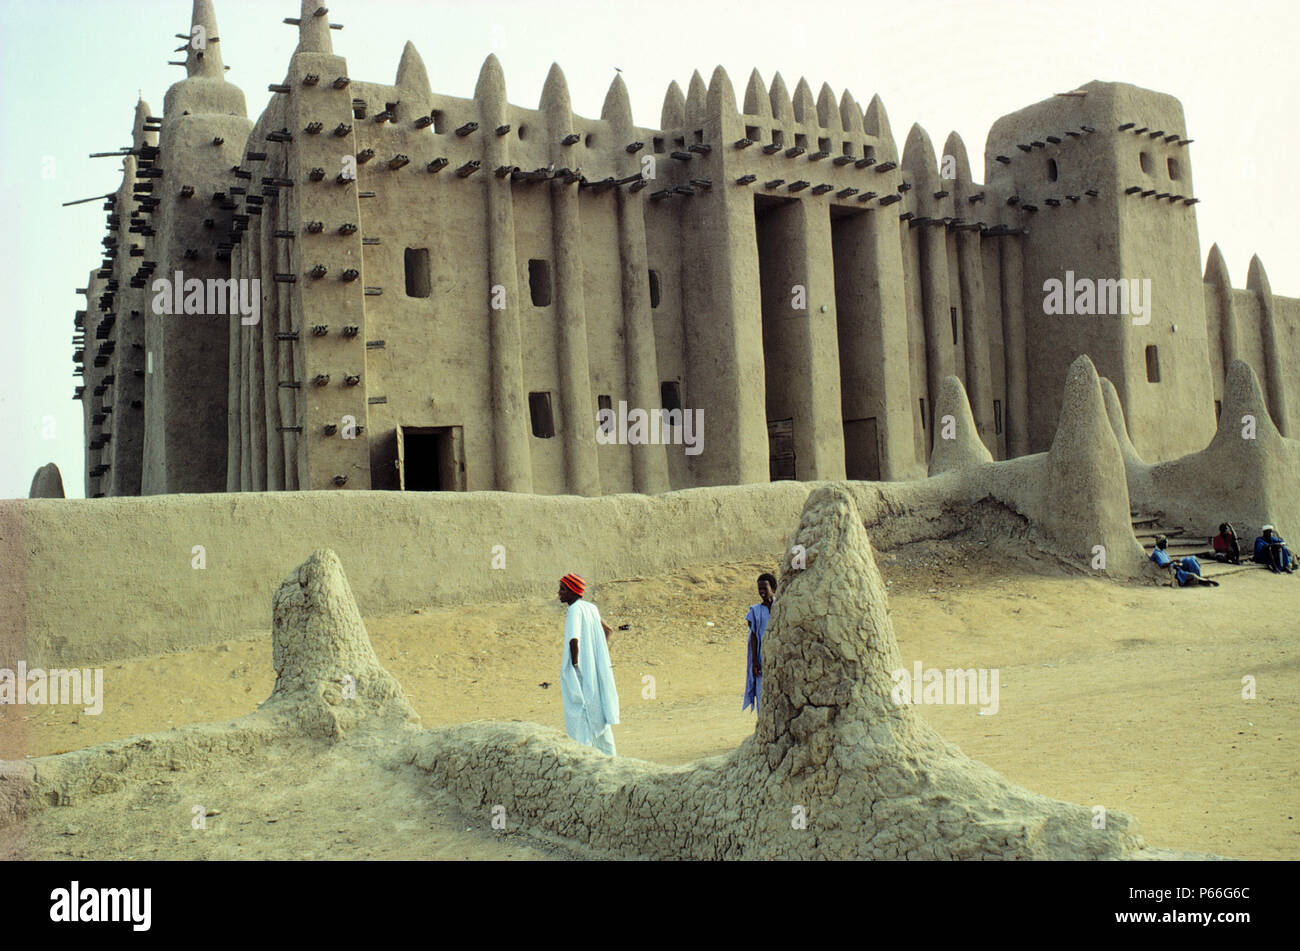 Traditional mud architecture - great mosque - city of Djenne - Mali Stock Photo